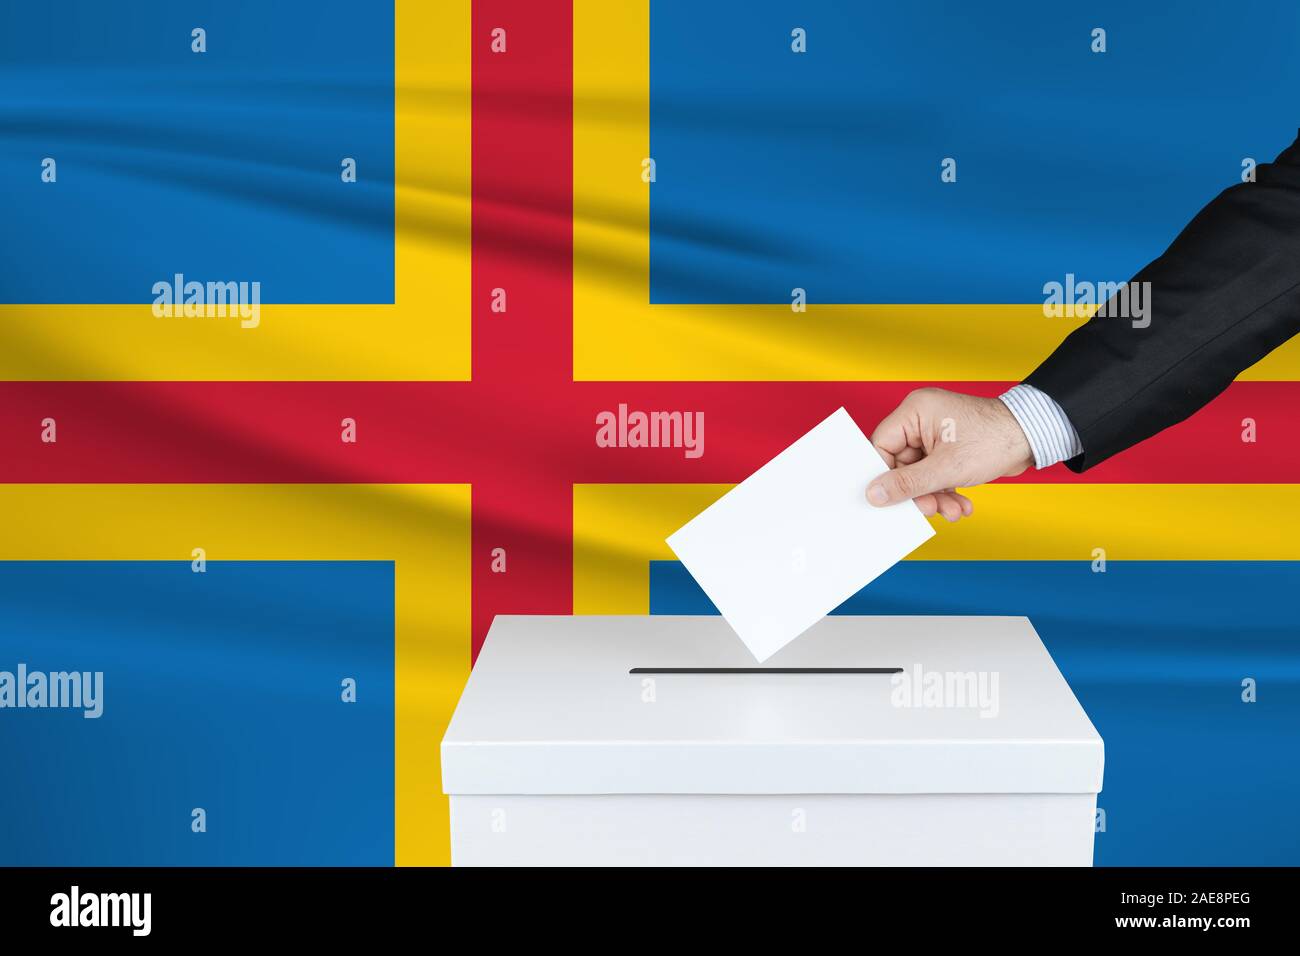 Election in Aland. The hand of man putting his vote in the ballot box. Waved Aland flag on background. Stock Photo